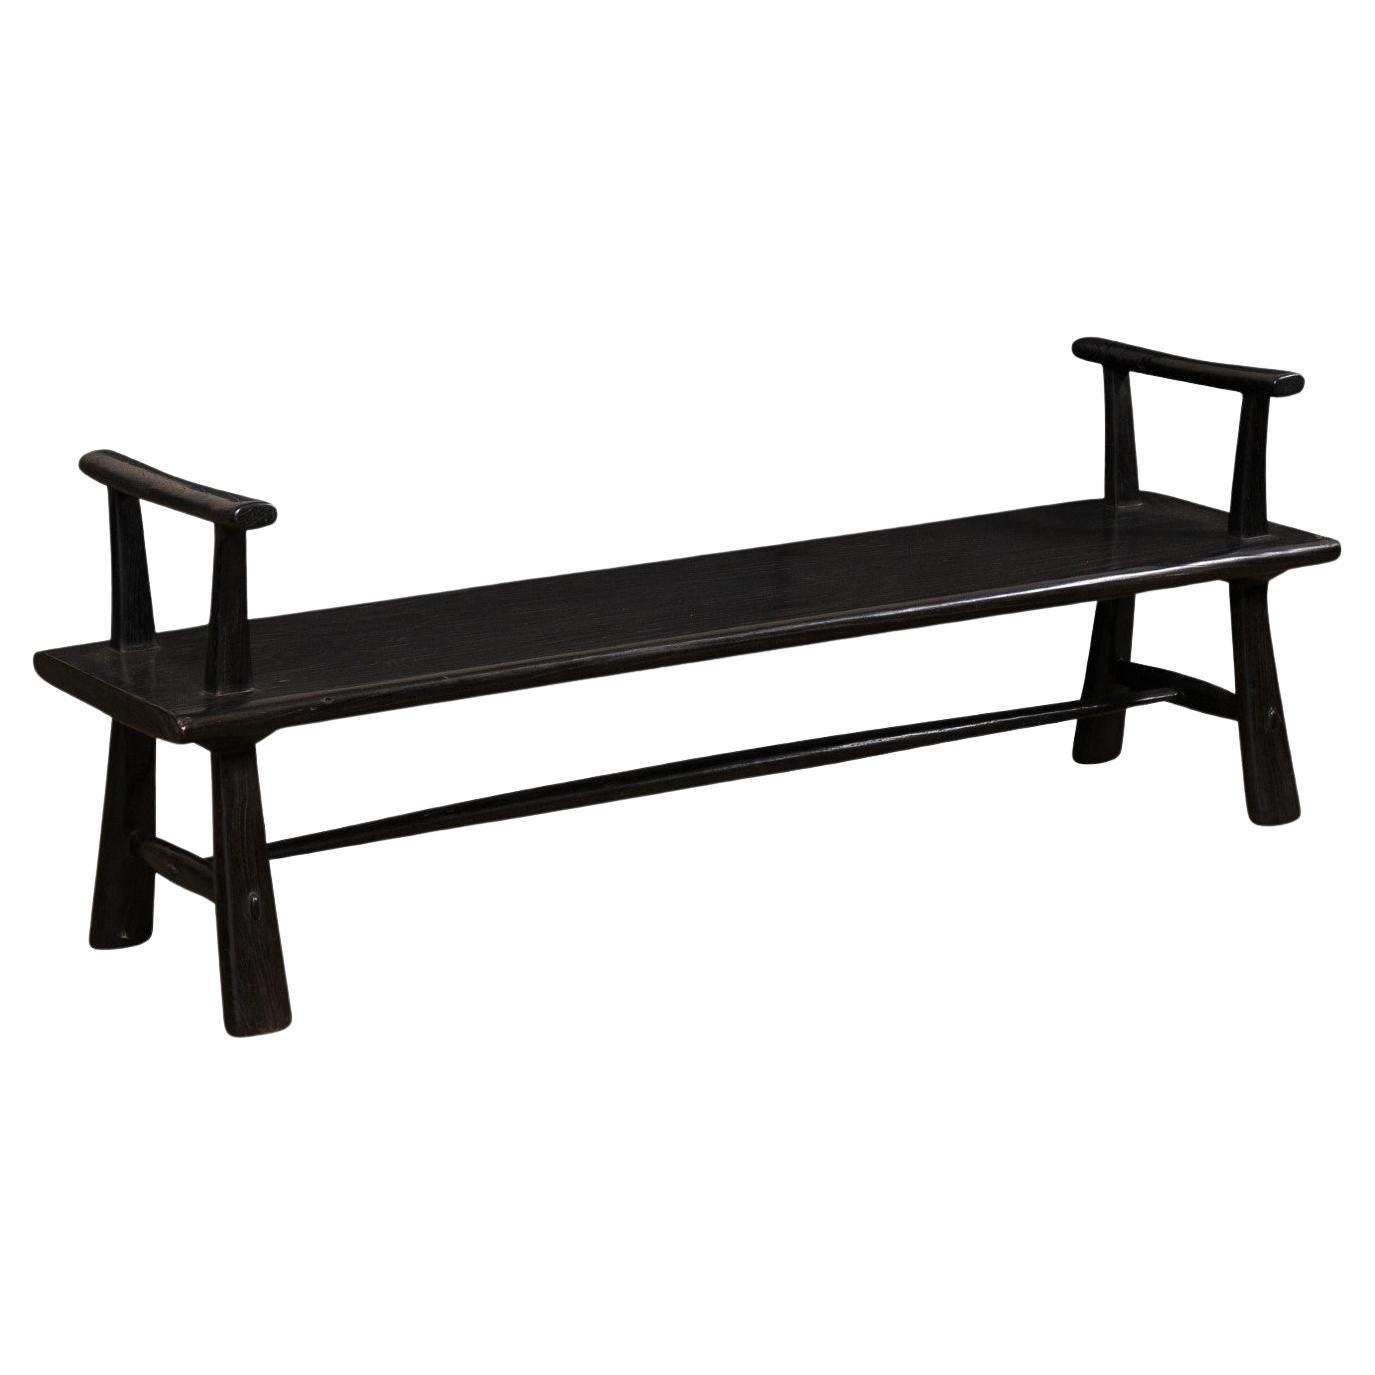 A Sleek and Sophisticated 5.75' Ebonized Teak Bench, Beautifully Artisan Crafted For Sale